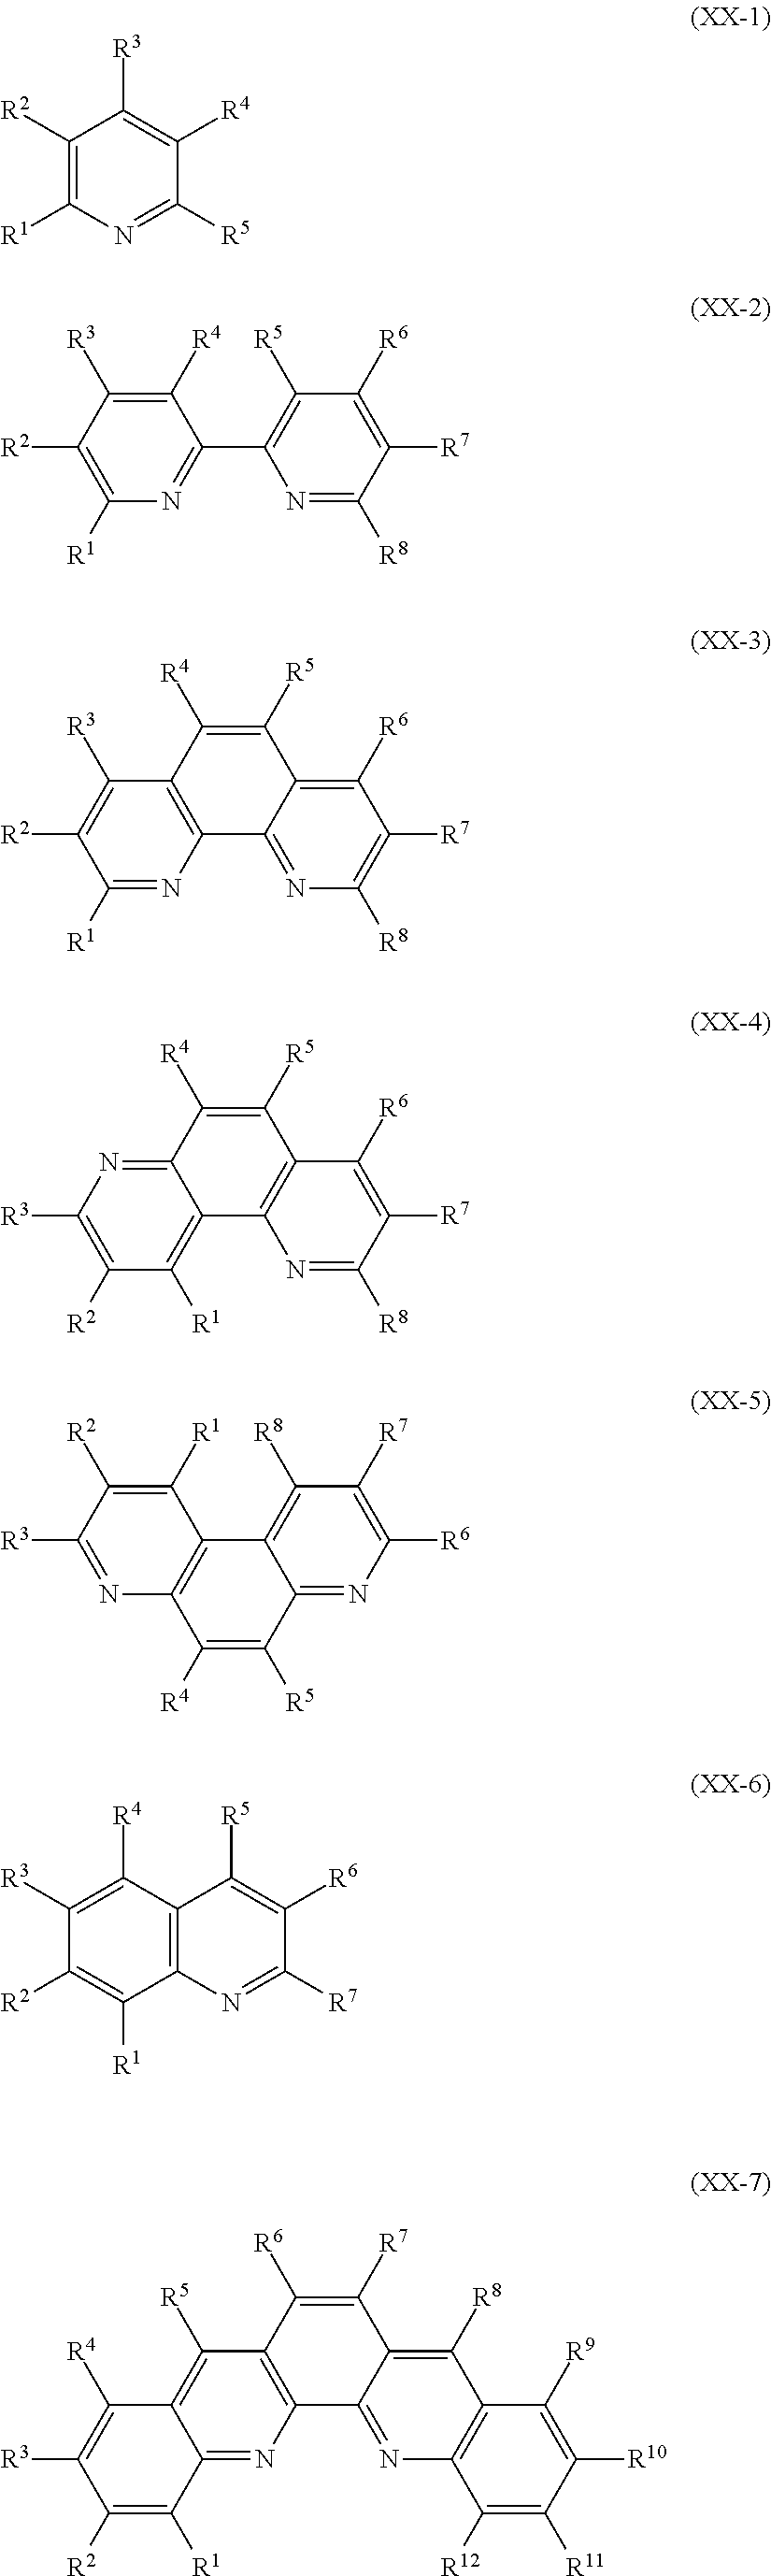 Metal complexes for use as dopants and other uses